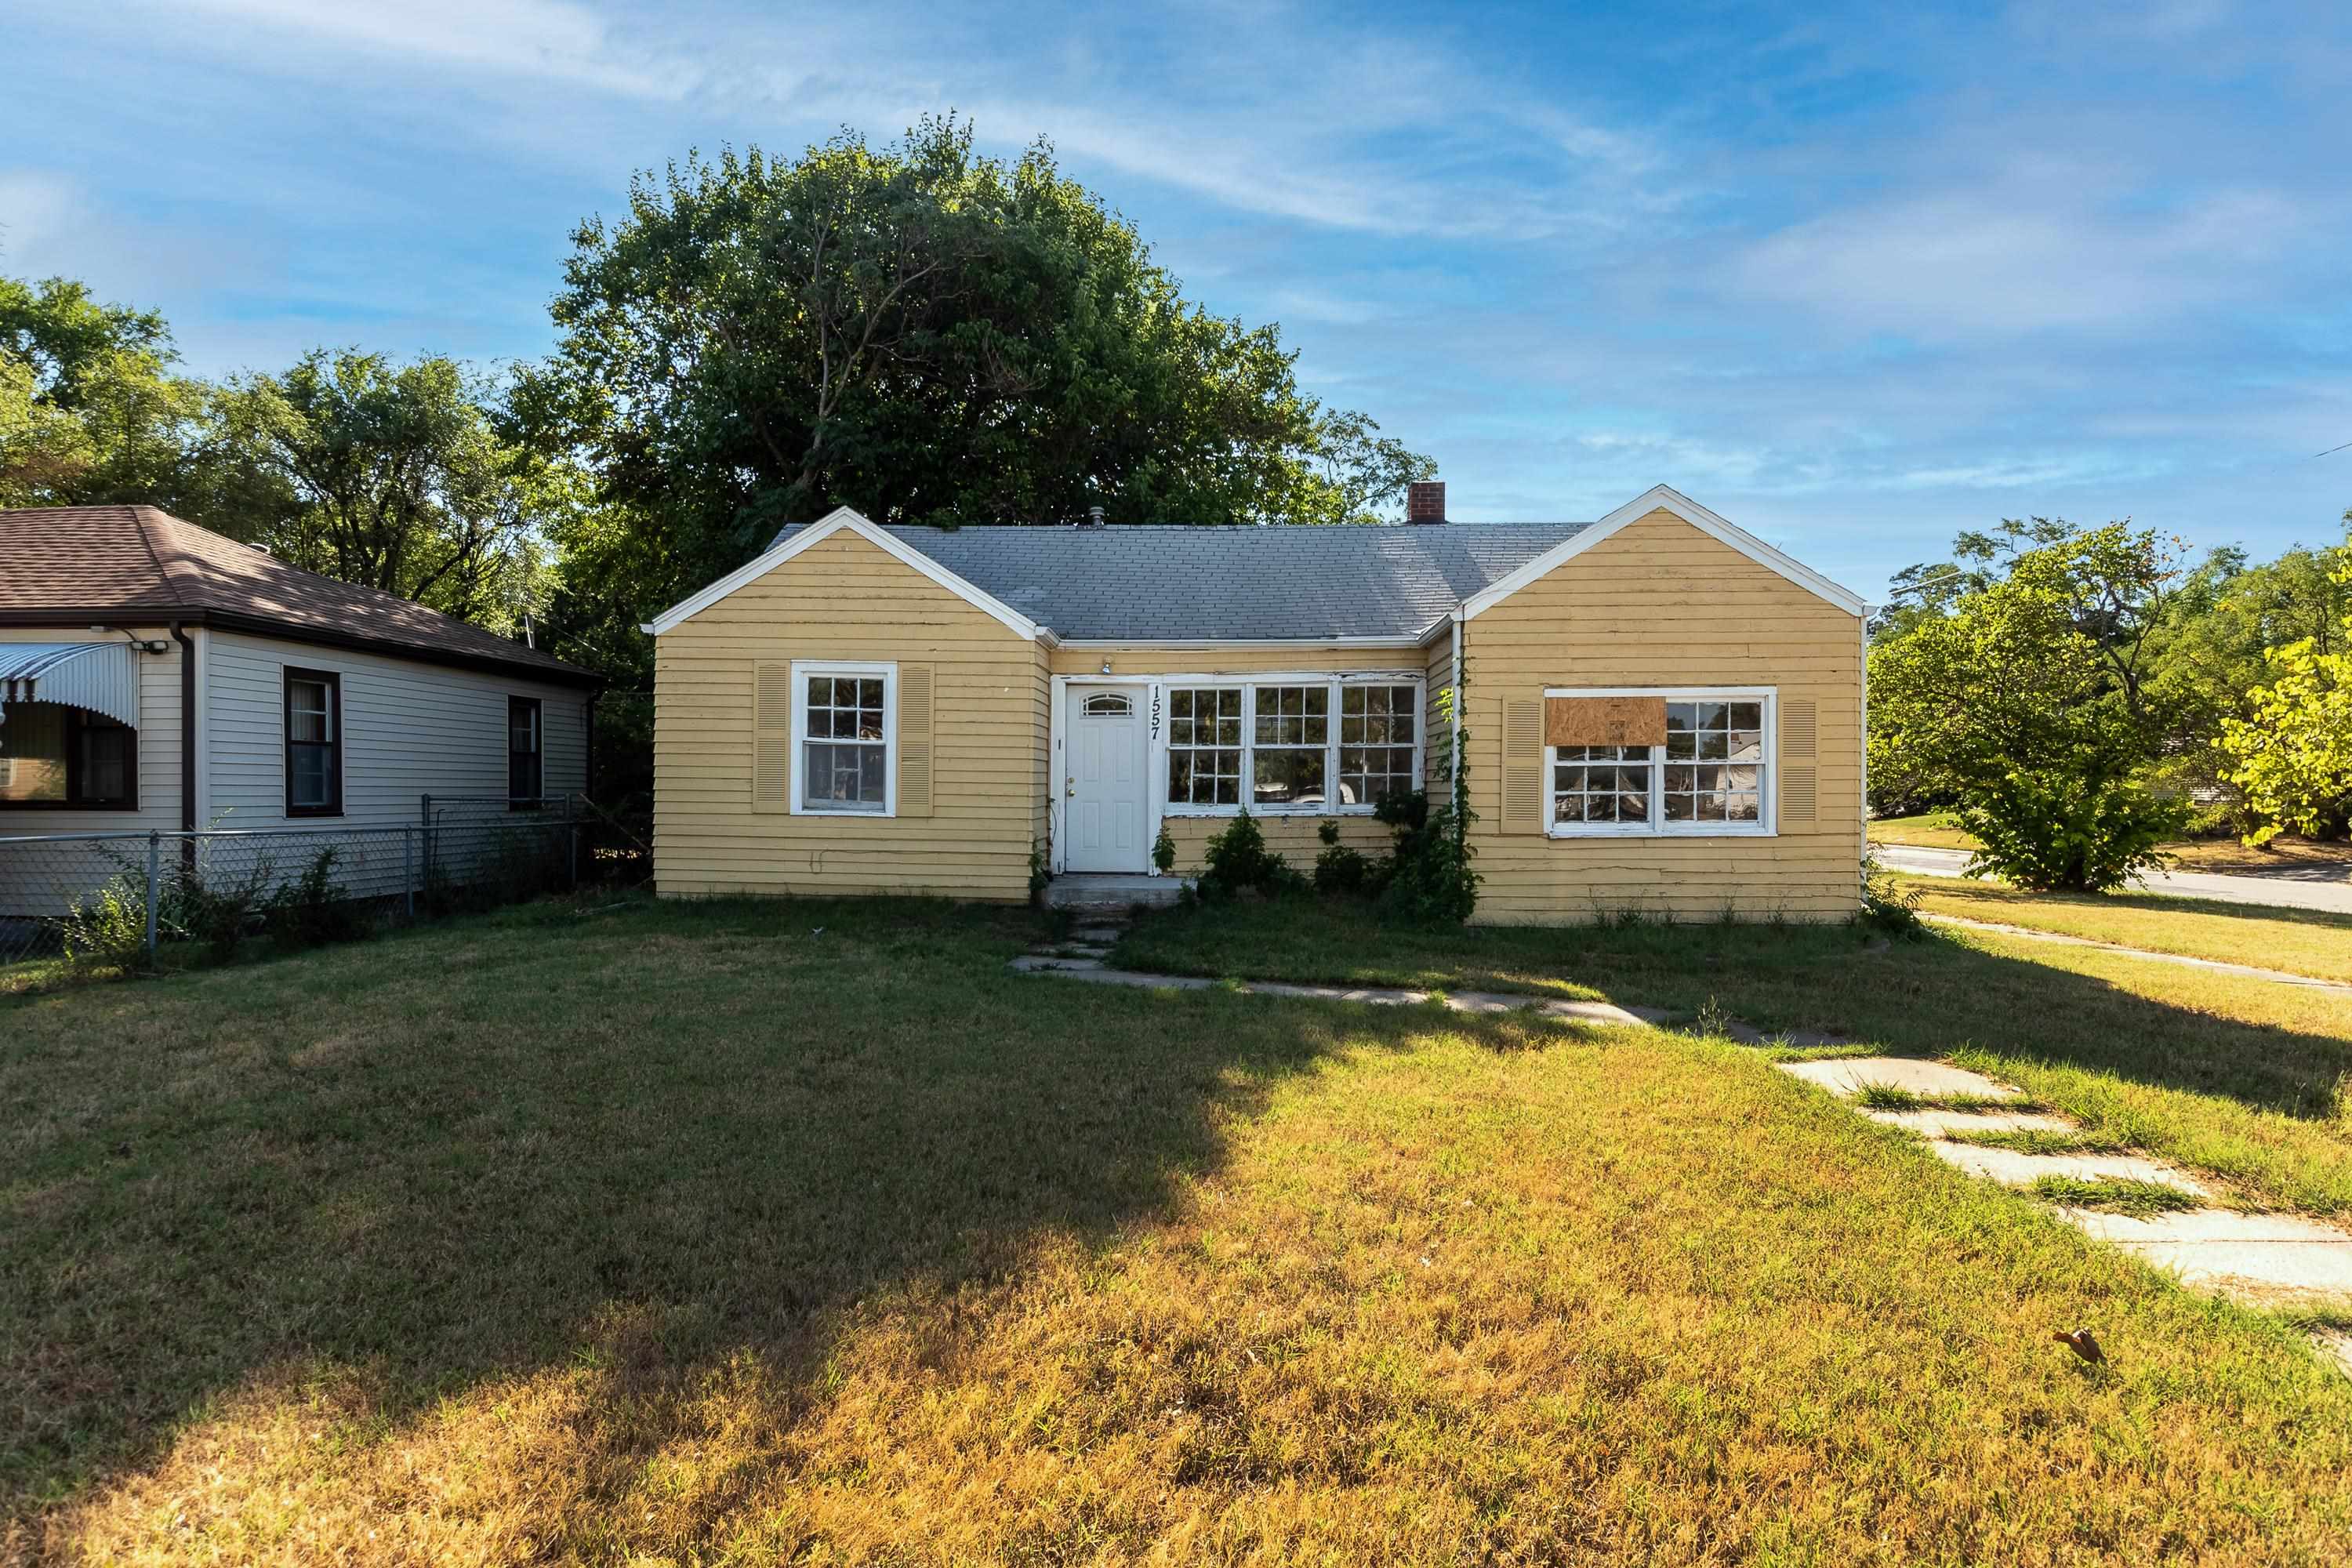 Your opportunity to put your thumbprint and bid on this 3 bedroom 1 bath ranch home in Northeast wic